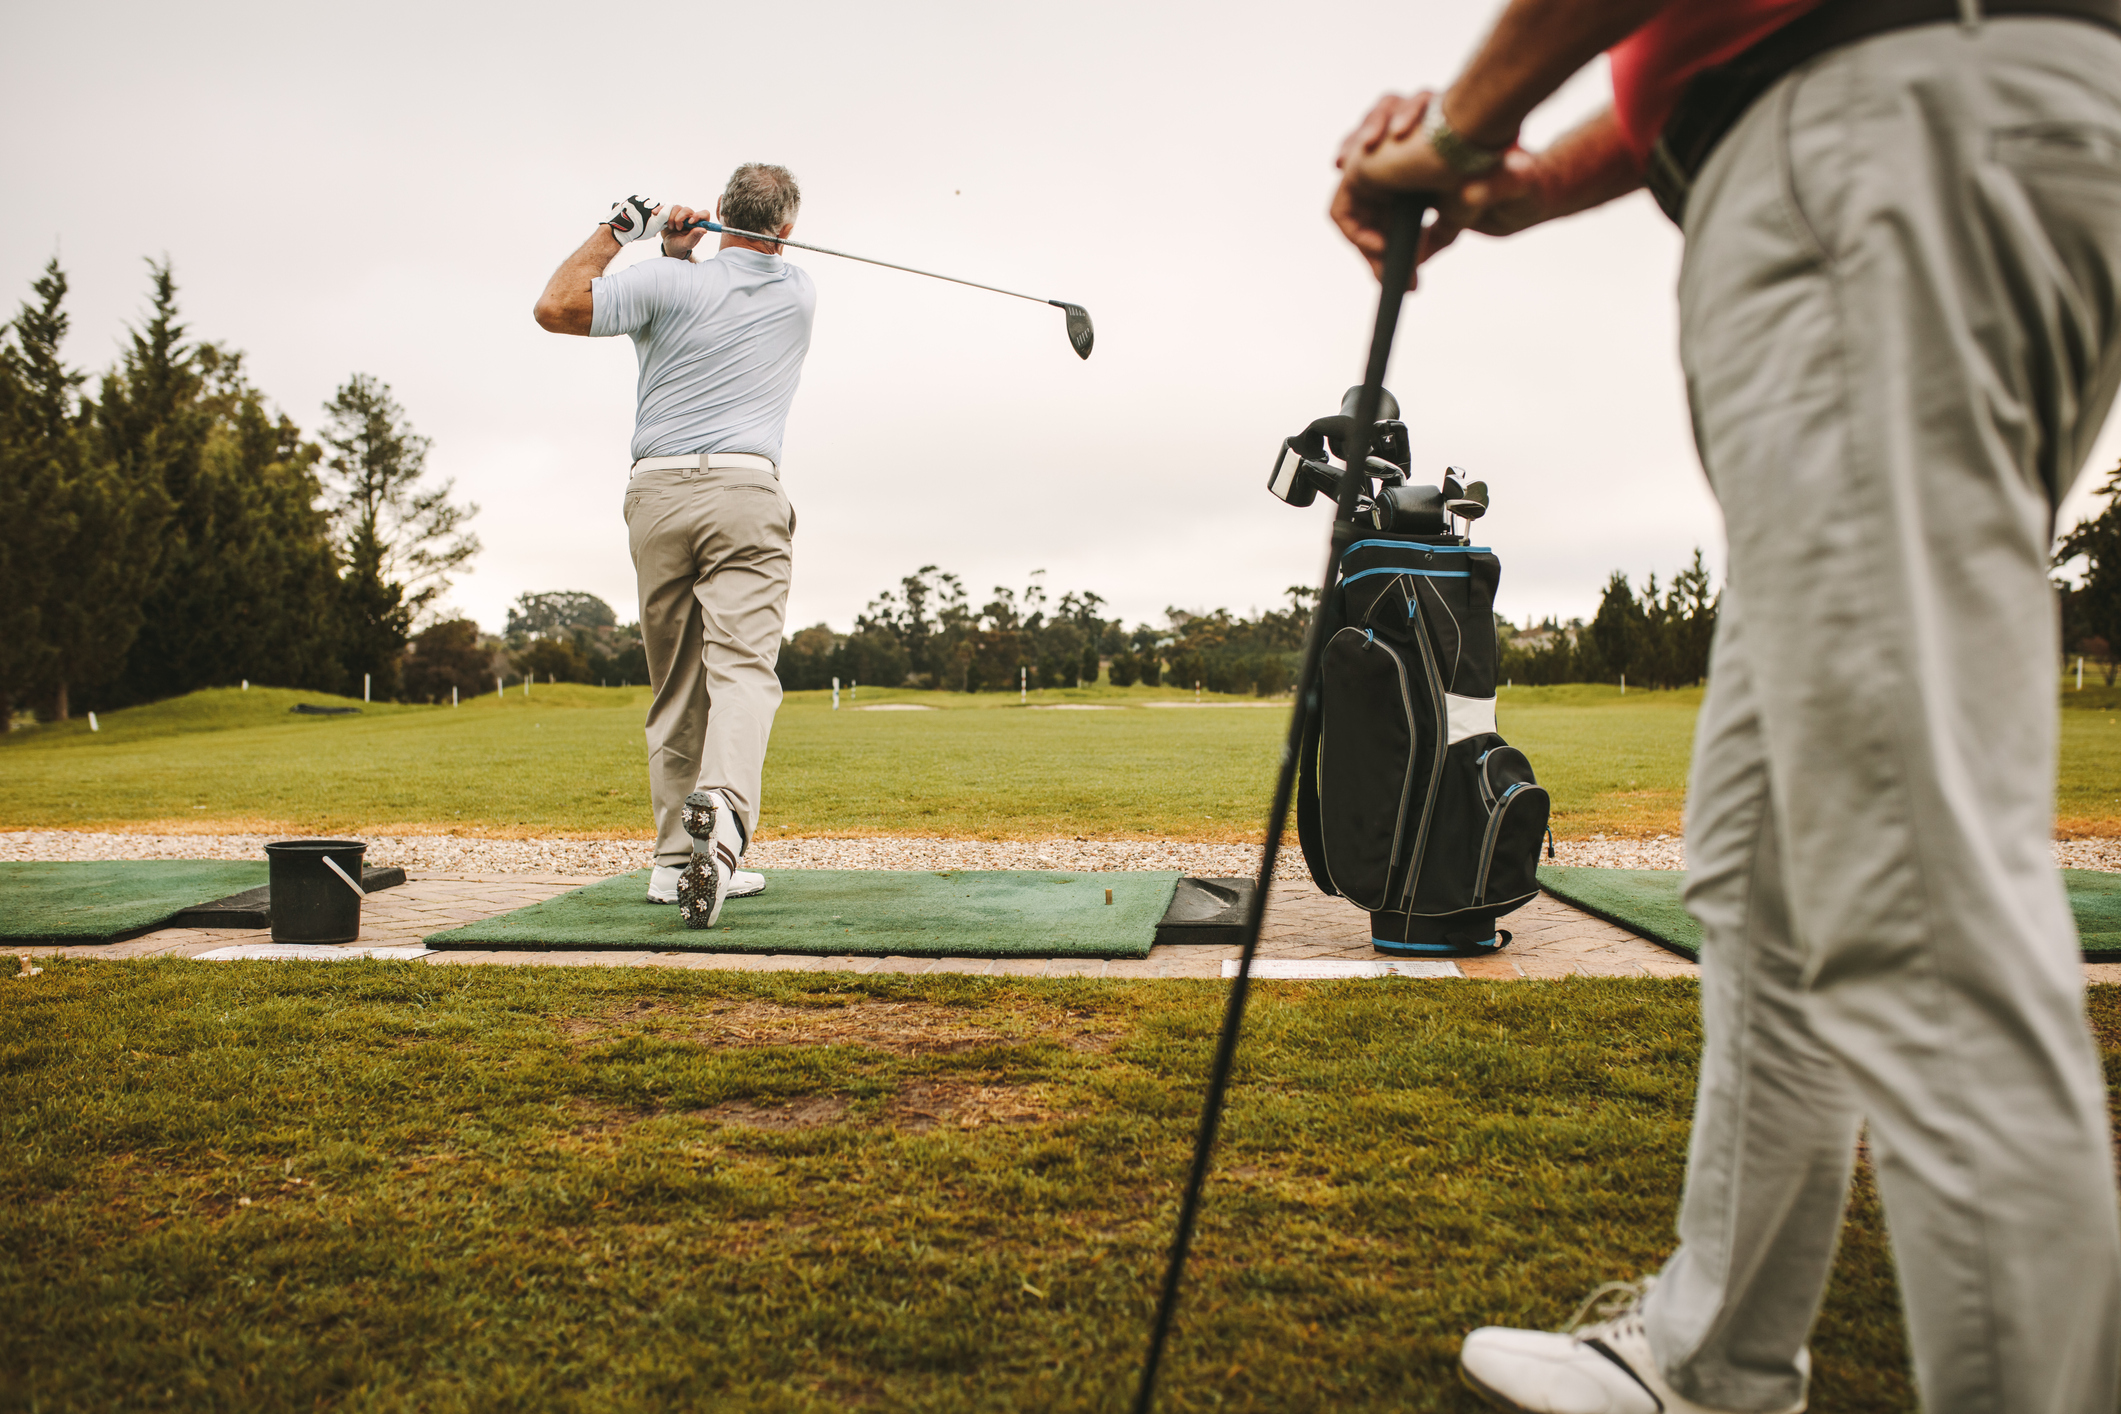 An Image of Two Men at a Driving Range.